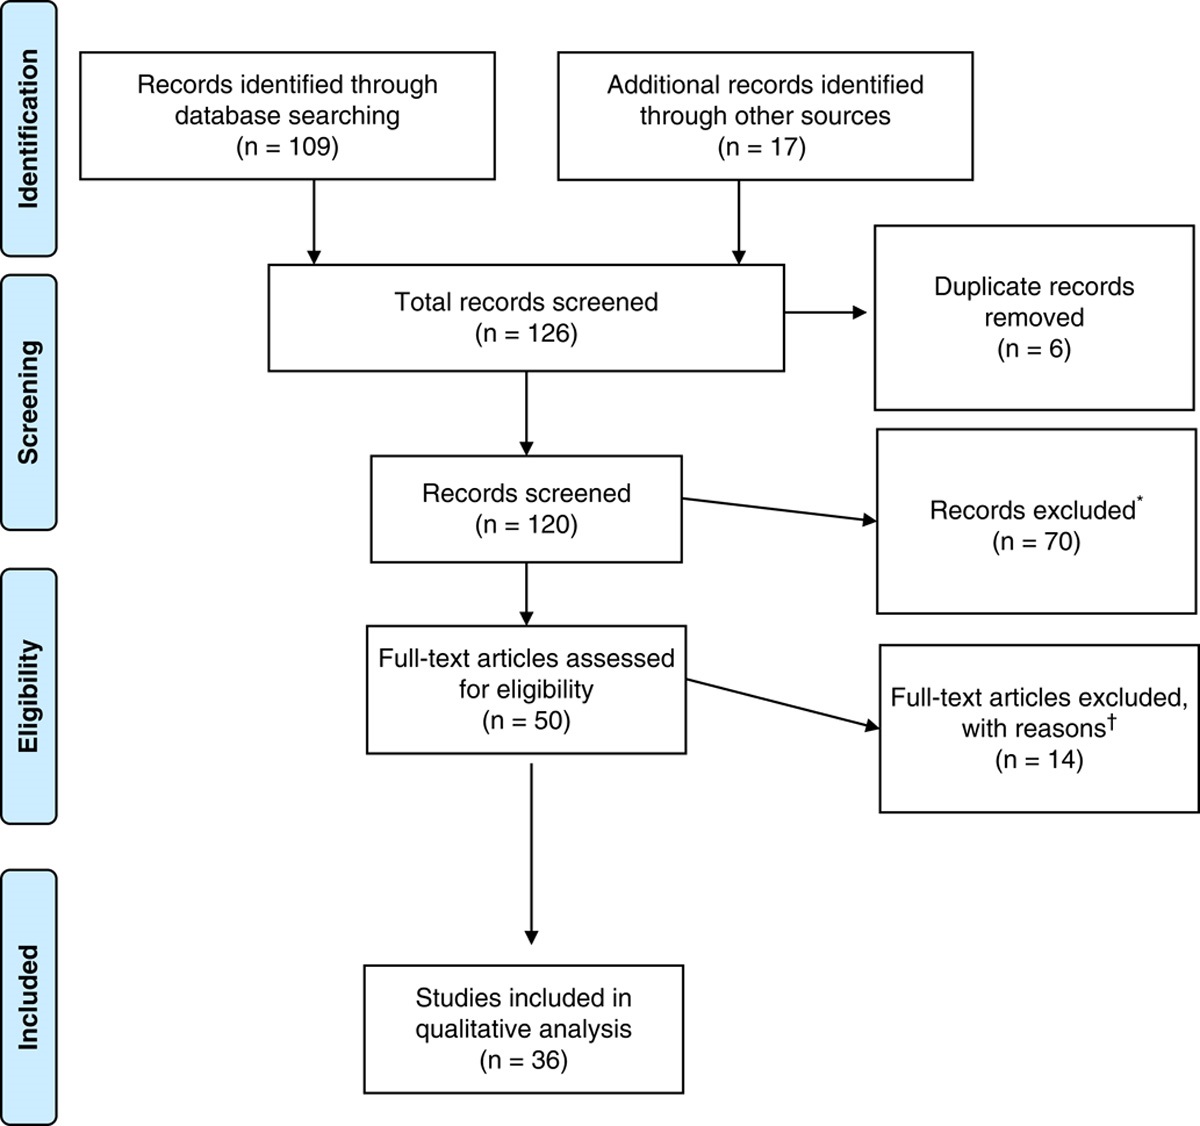 How Hypertension Guidelines Address Social Determinants of Health: A Systematic Scoping Review